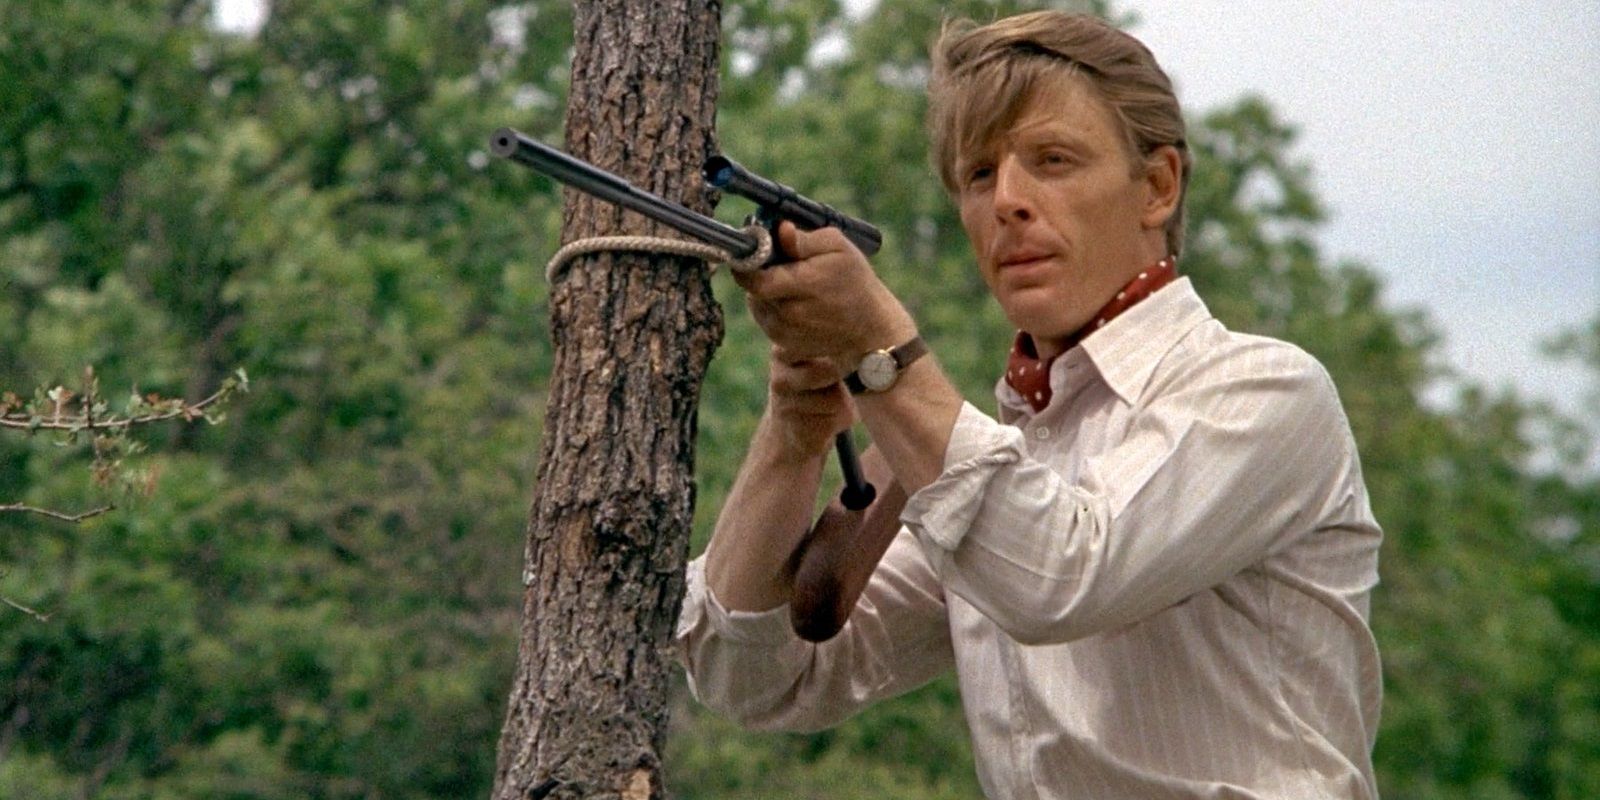 Edward Fox as the Jackal in The Day of the Jackal